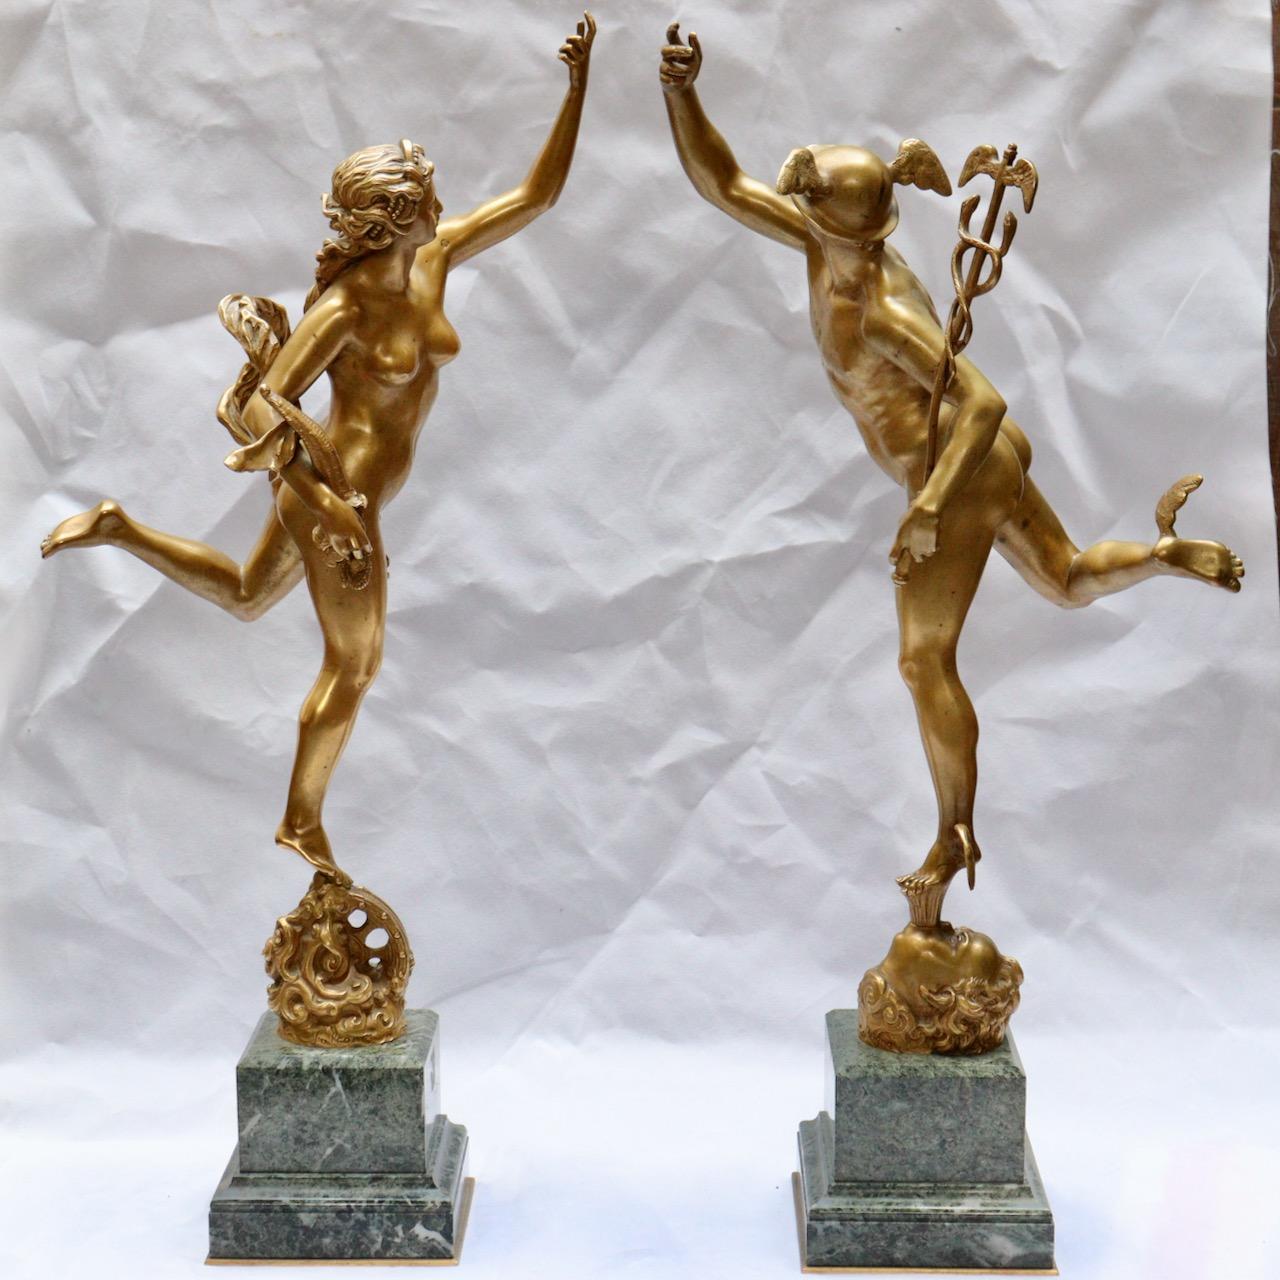 French Mercury & Fortuna, A 19th Century Pair of Bronze Sculptures After Giambologna